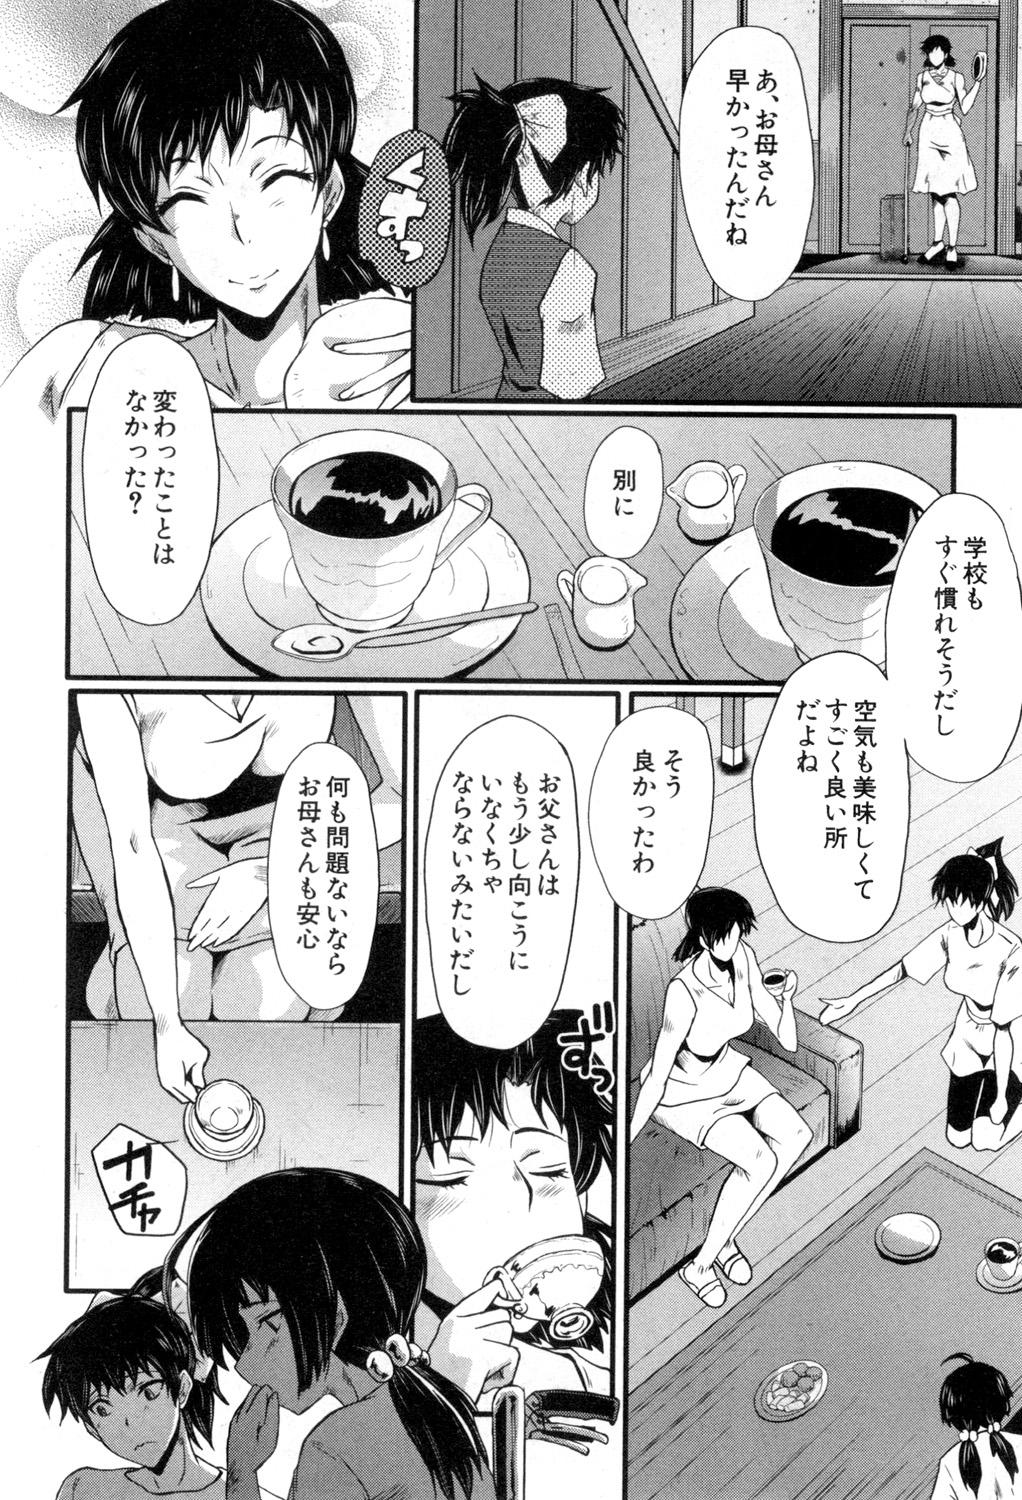 BUSTER COMIC 2015-09 126